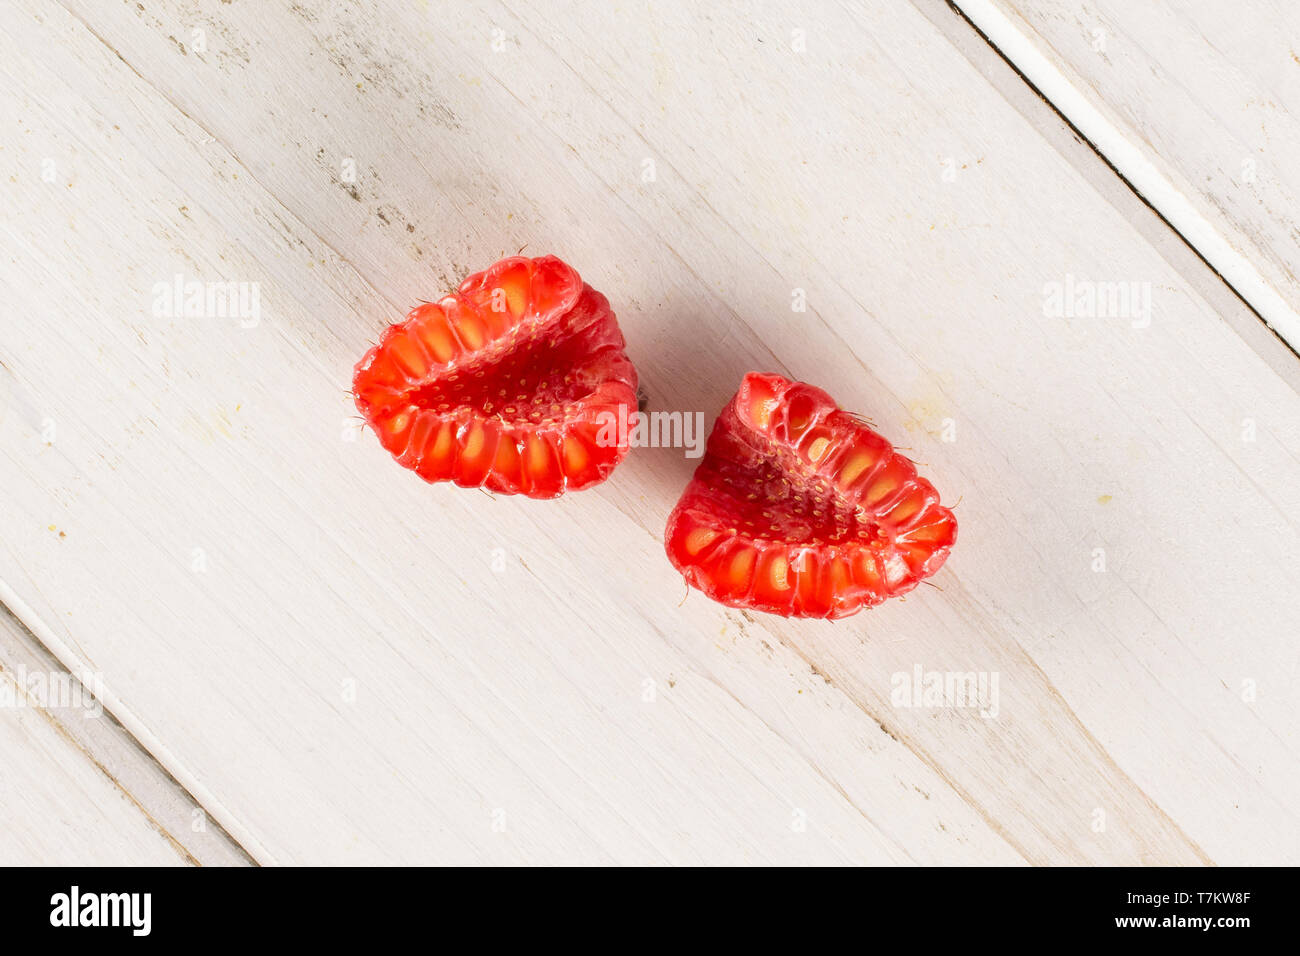 Group of two halves of fresh red raspberry cross section flatlay on white wood Stock Photo